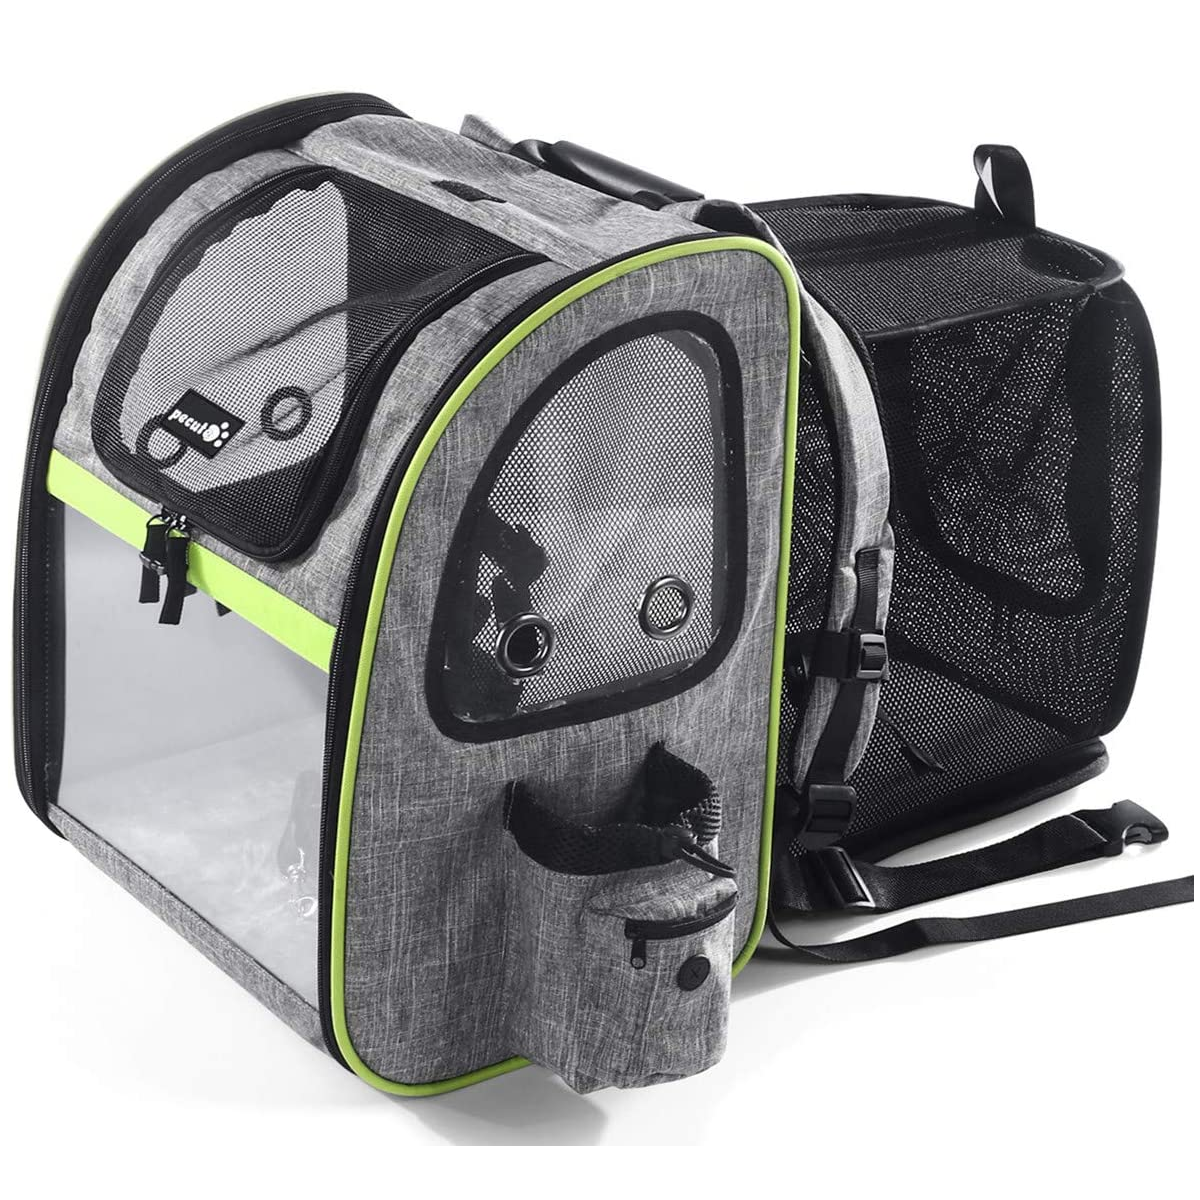 Pecute Pet Carrier Backpack